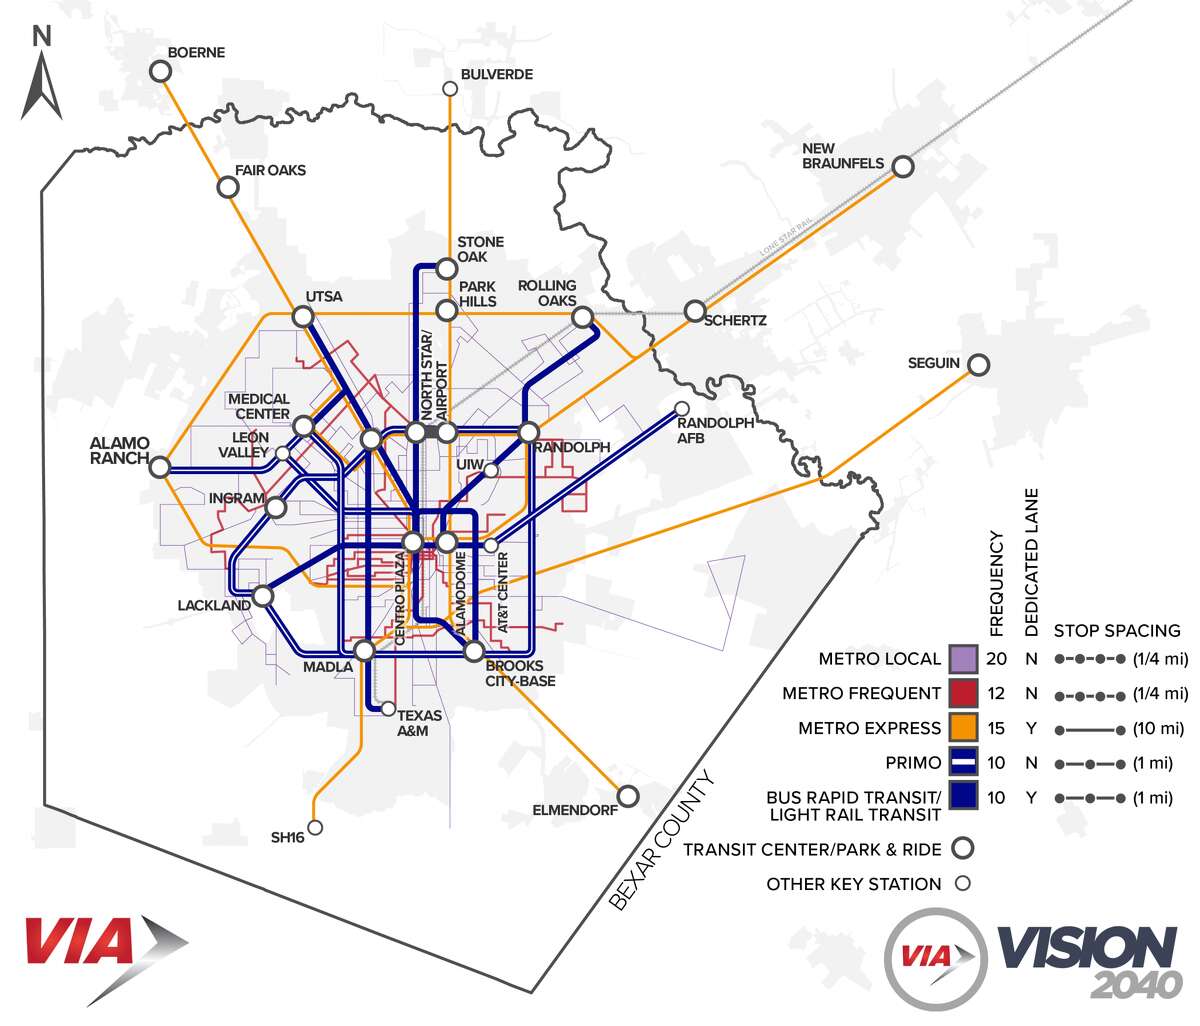 Vision 2040's Long Range Plan System includes rapid transit near the center of San Antonio plus transportation to the city's suburbs.